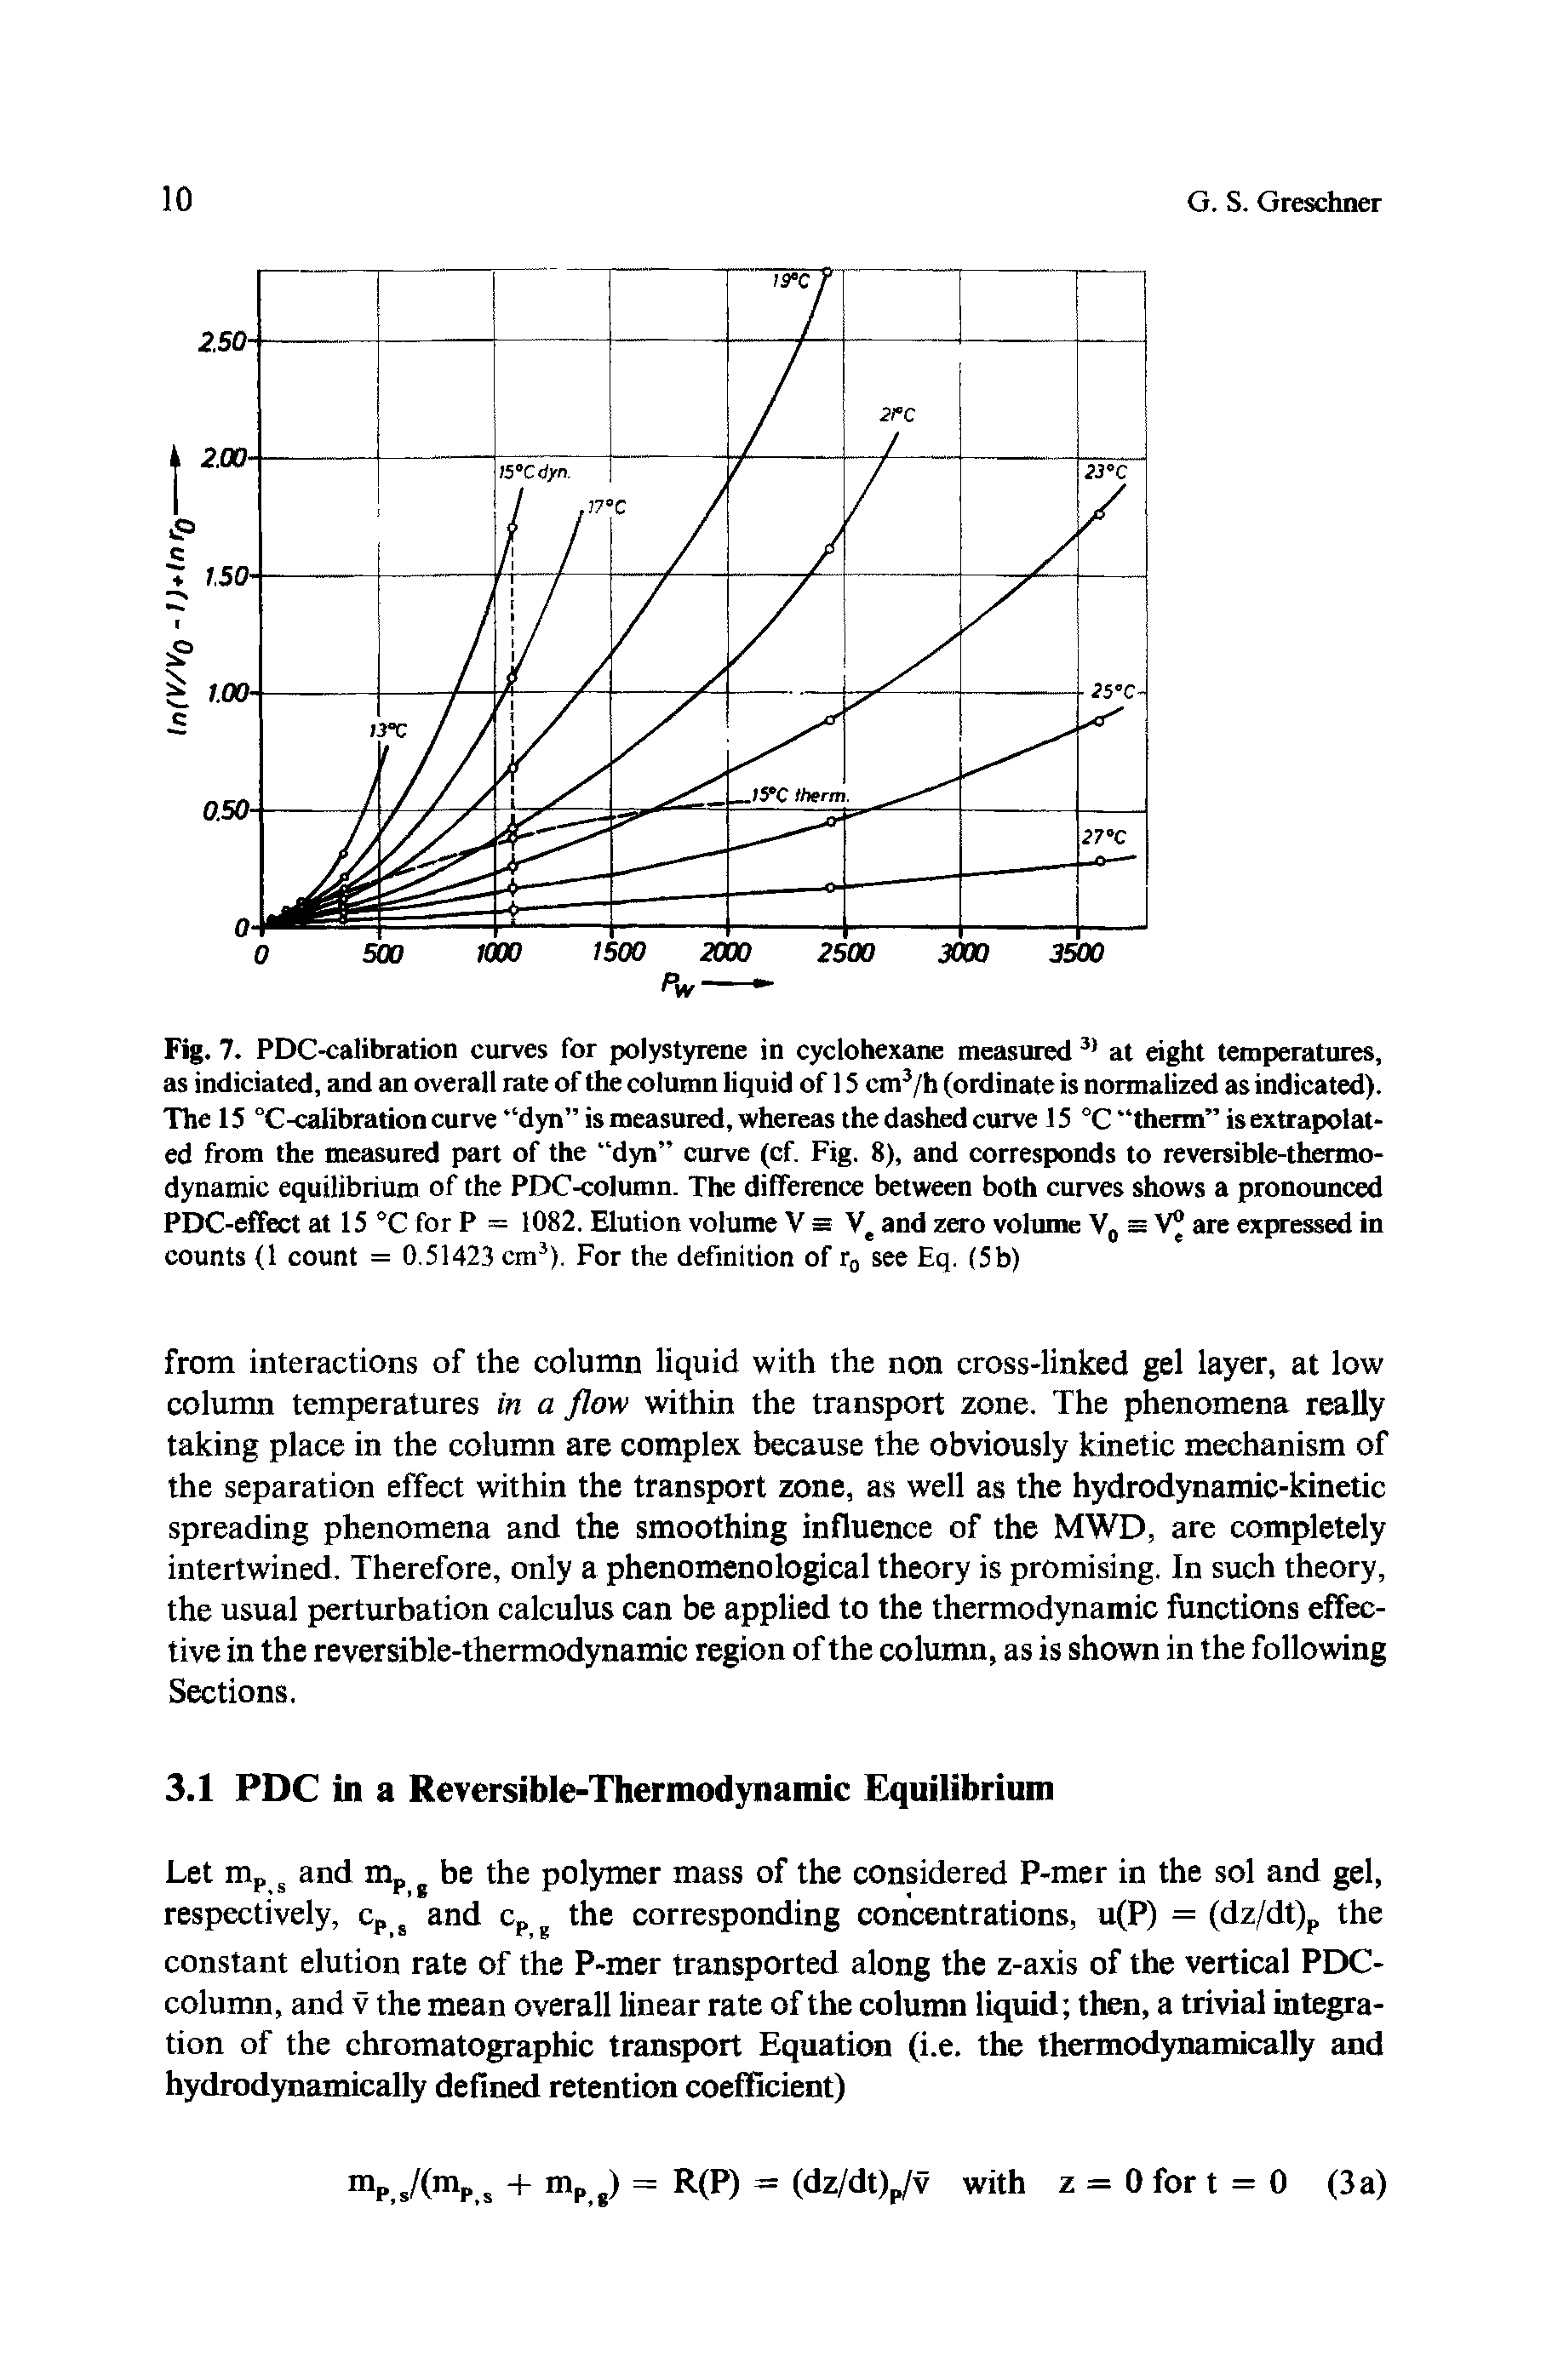 Fig. 7. PDC-calibration curves for polystyrene in cyclohexane measured 3> at eight temperatures, as indiciated, and an overall rate of the column liquid of 15 cm3/h (ordinate is normalized as indicated). The 15 °C-calibration curve dyn is measured, whereas the dashed curve 15 °C therm is extrapolated from the measured part of the dyn curve (cf. Fig. 8), and corresponds to reversible-thermodynamic equilibrium of the PDC-column. The difference between both curves shows a pronounced PDC-effect at 15 °C for P = 1082. Elution volume V = Ve and zero volume V0 = are expressed in counts (1 count = 0.51423 cm3). For the definition of r0 see Eq. (5 b)...